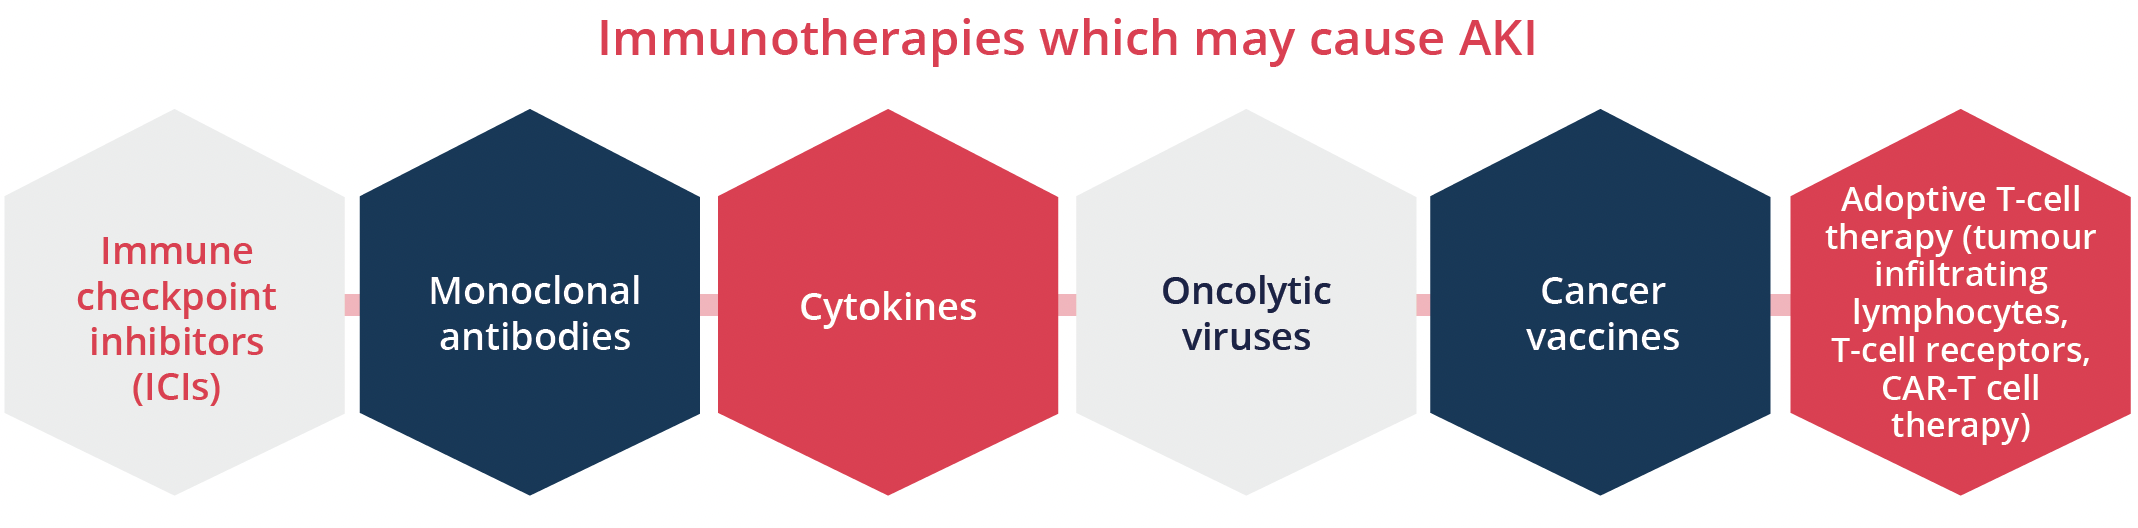 Six immunotherapies such as vaccines and ICIs that may possibly cause AKI